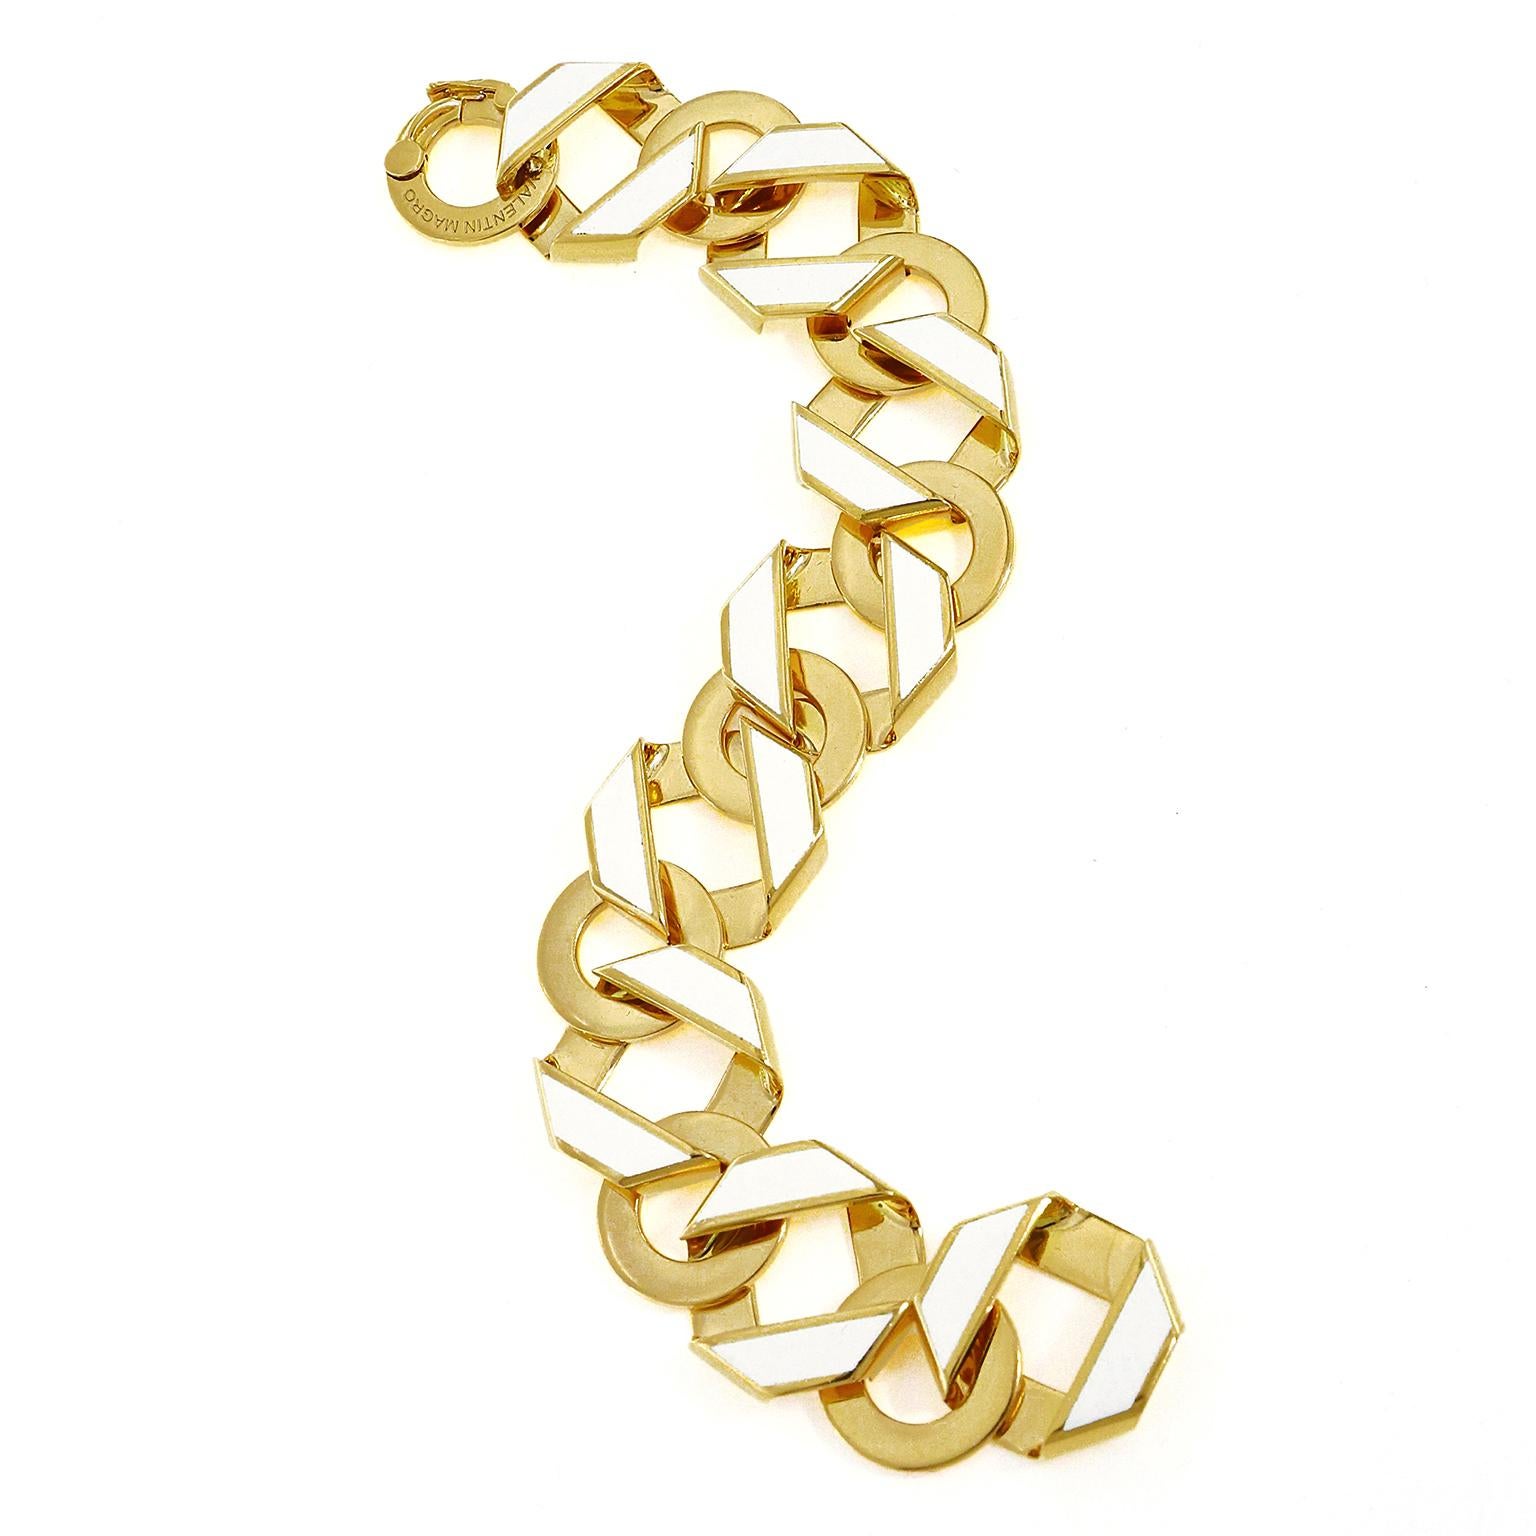 18k yellow gold and white enamel join together to bring a glow for this bracelet. An intertwined pattern of flattened hexagonal strips alternate with flat discs. The hexagonal strips feature white enamel on the sides for the gold to reflect in order